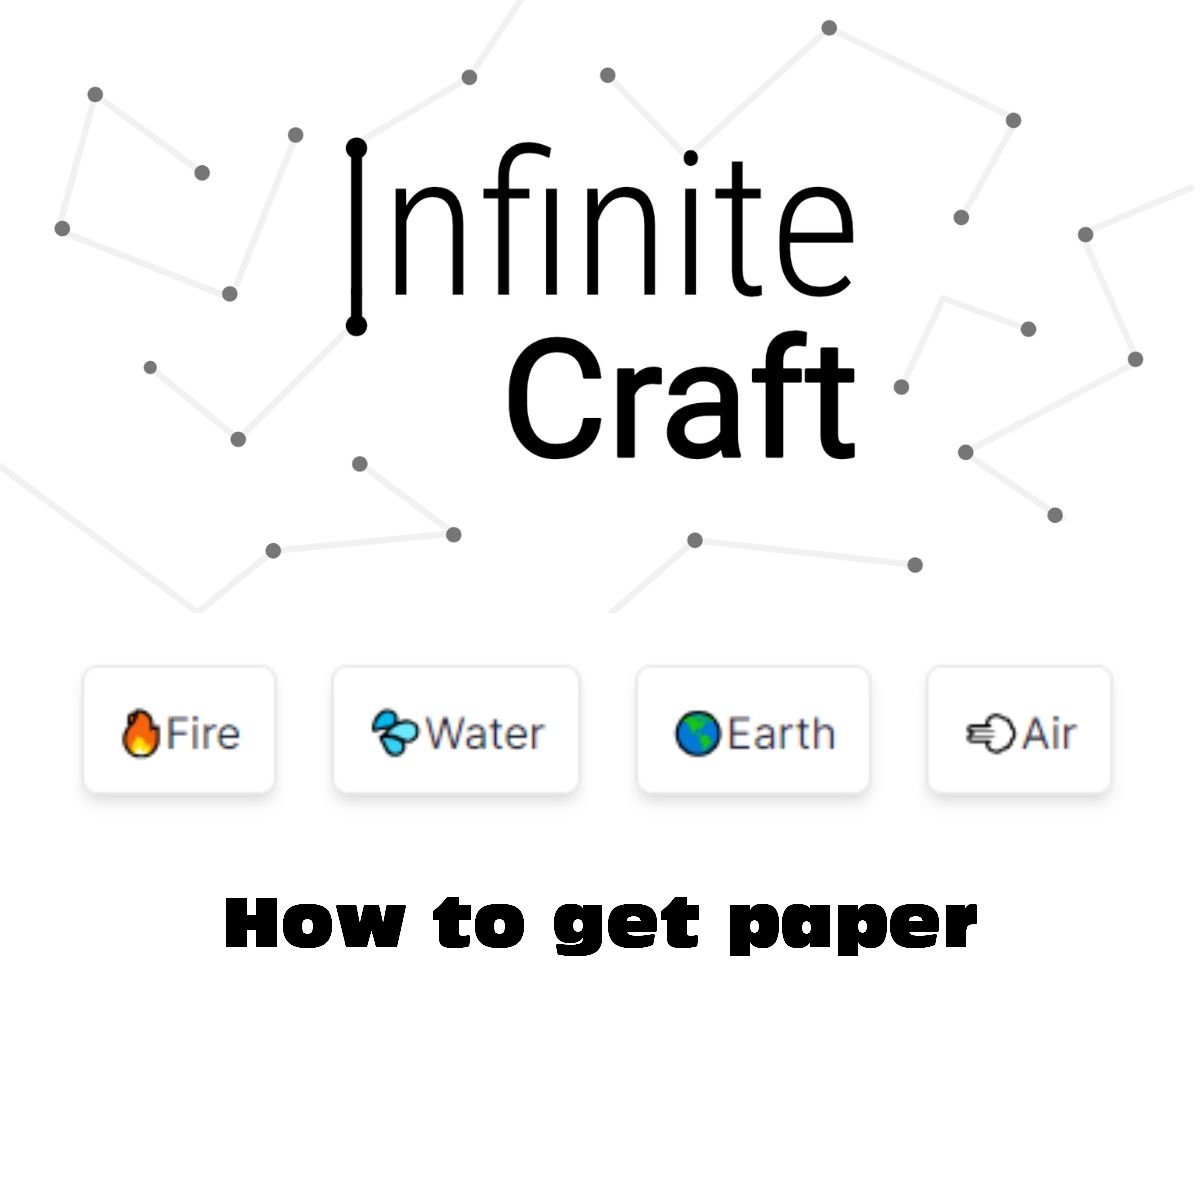 how to get paper in infinite craft